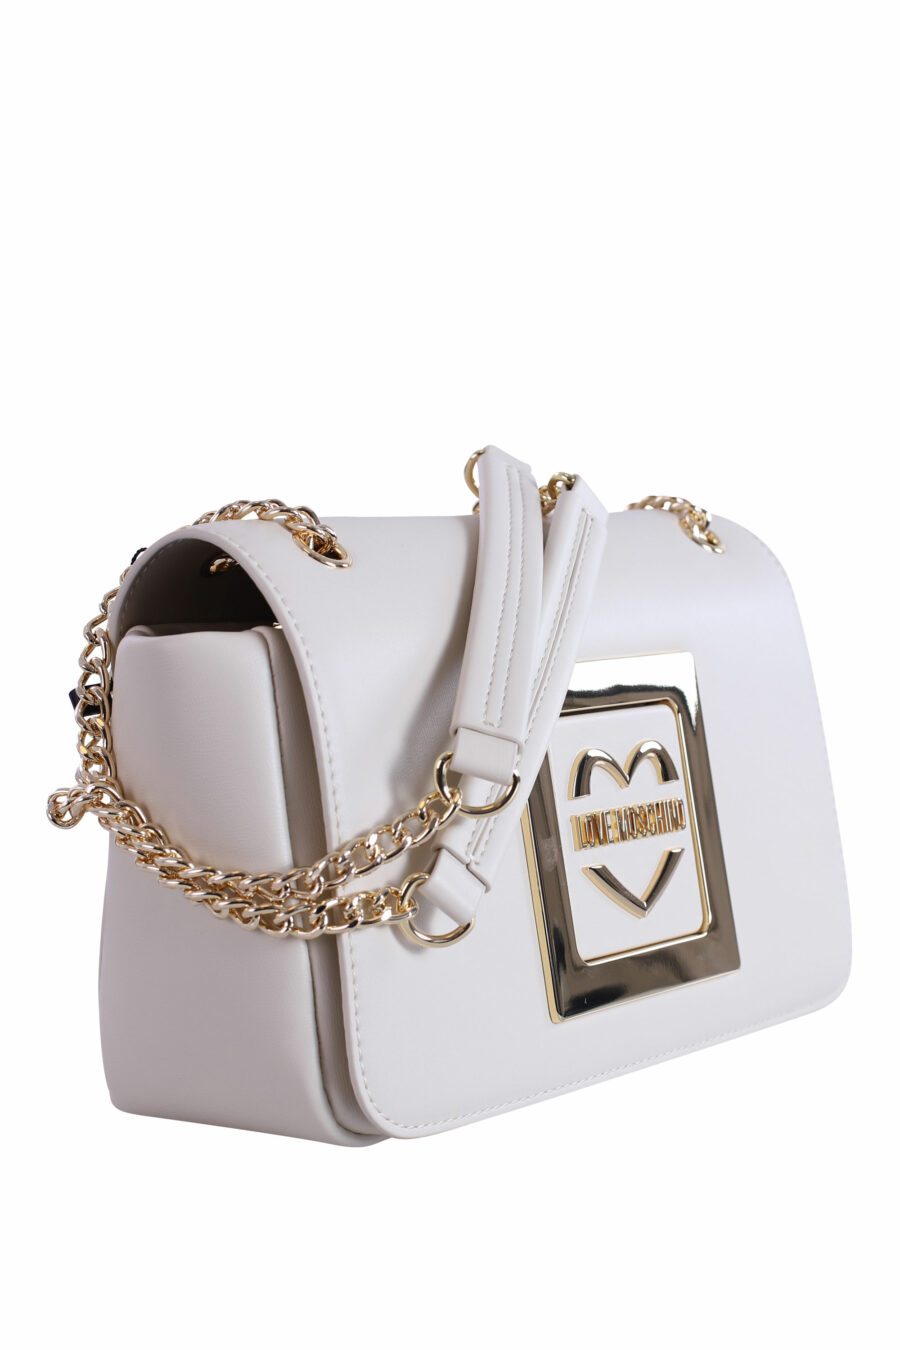 Beige shoulder bag with gold logo and chain - IMG 2884